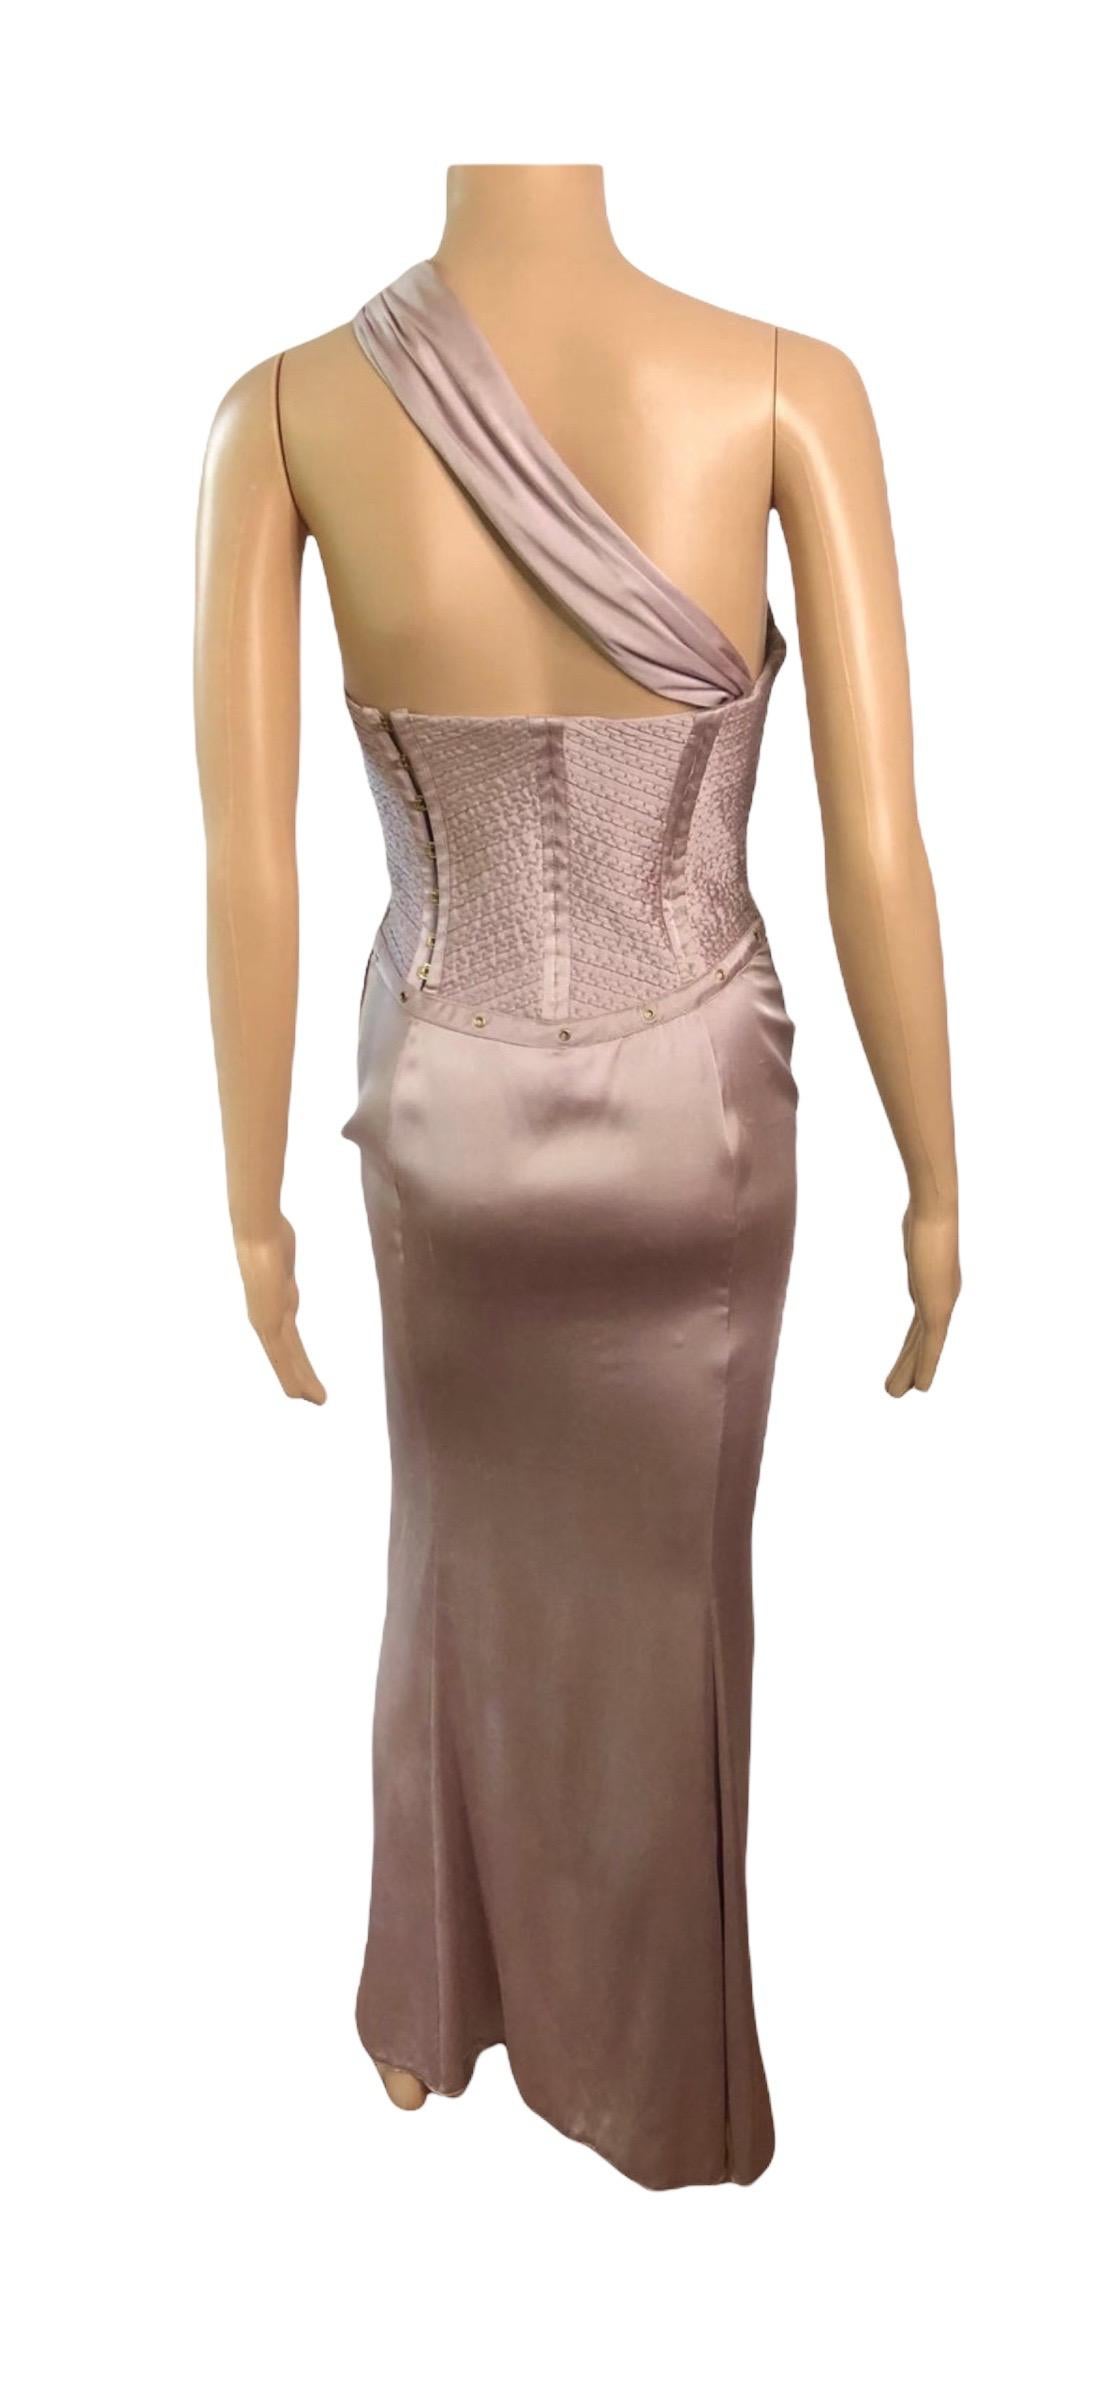 Tom Ford for Gucci F/W 2003 Runway Bustier Corset Silk Evening Dress Gown 5